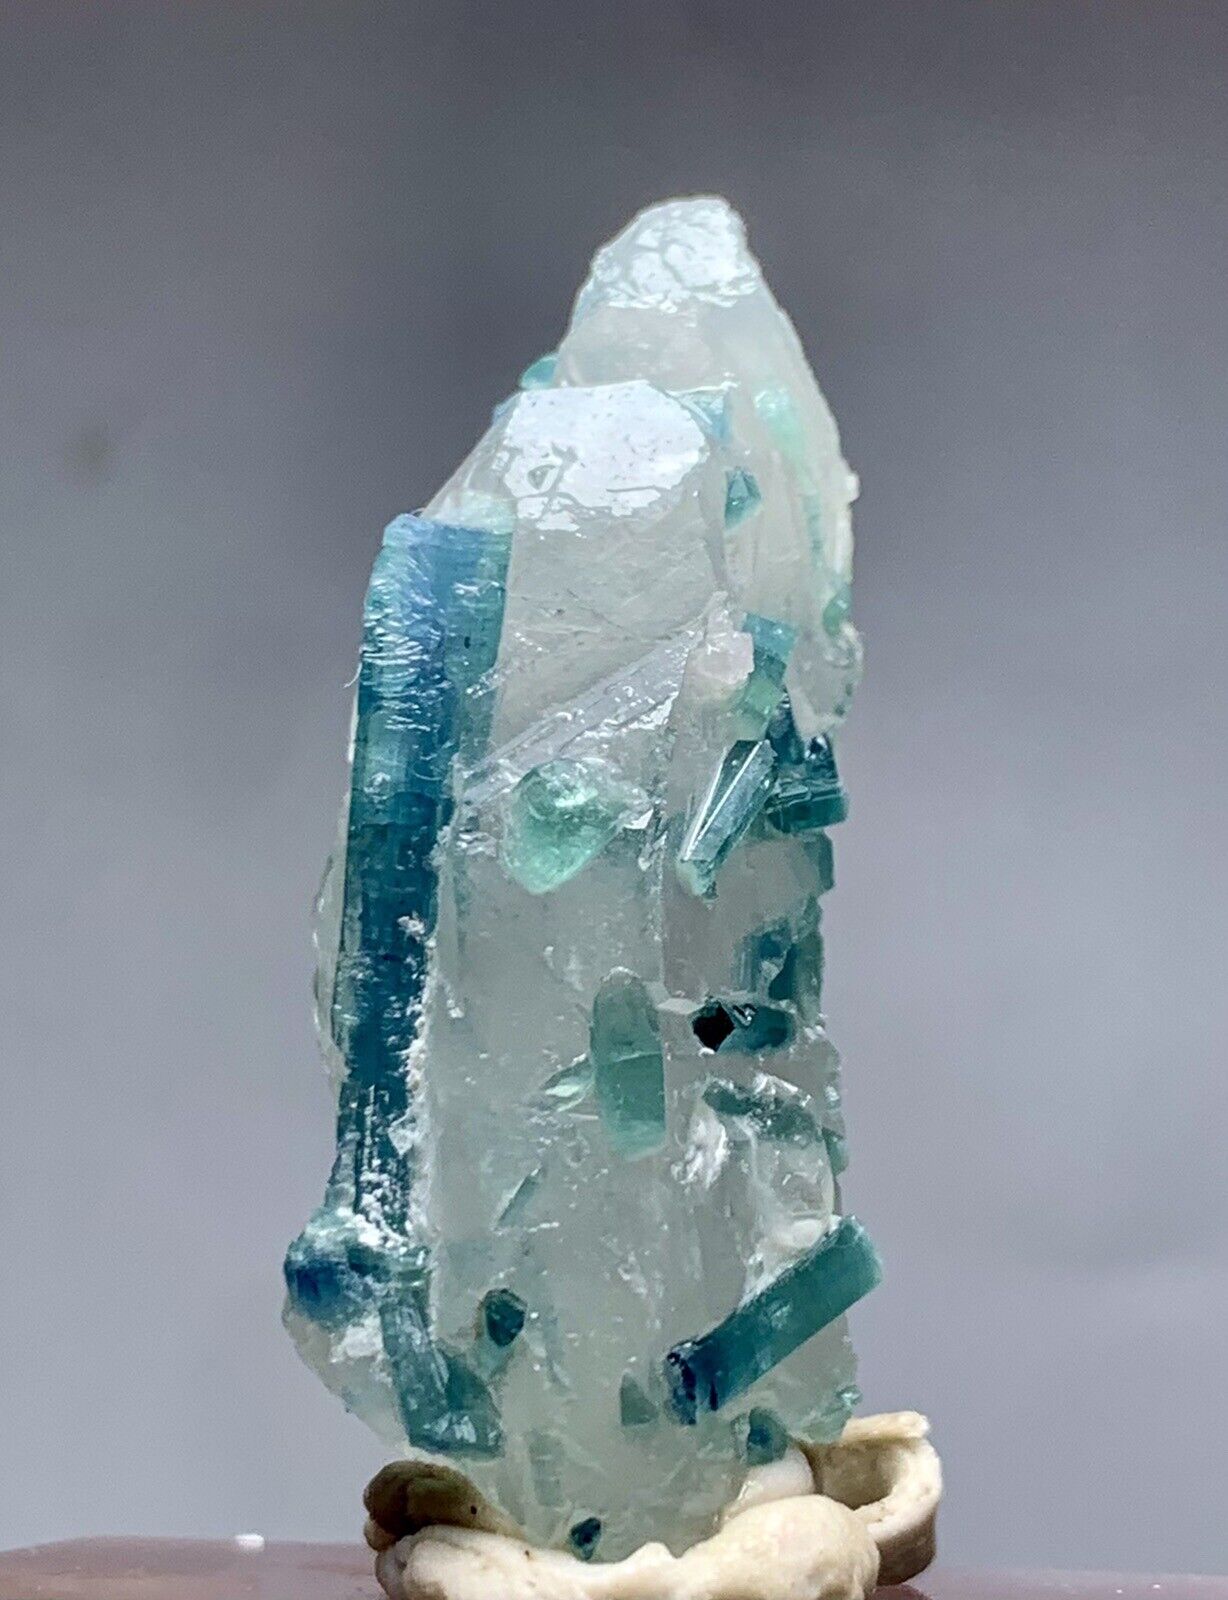 71 CT Beautiful Indicolite Tourmaline Crystal Bunch Specimen From Afghanistan